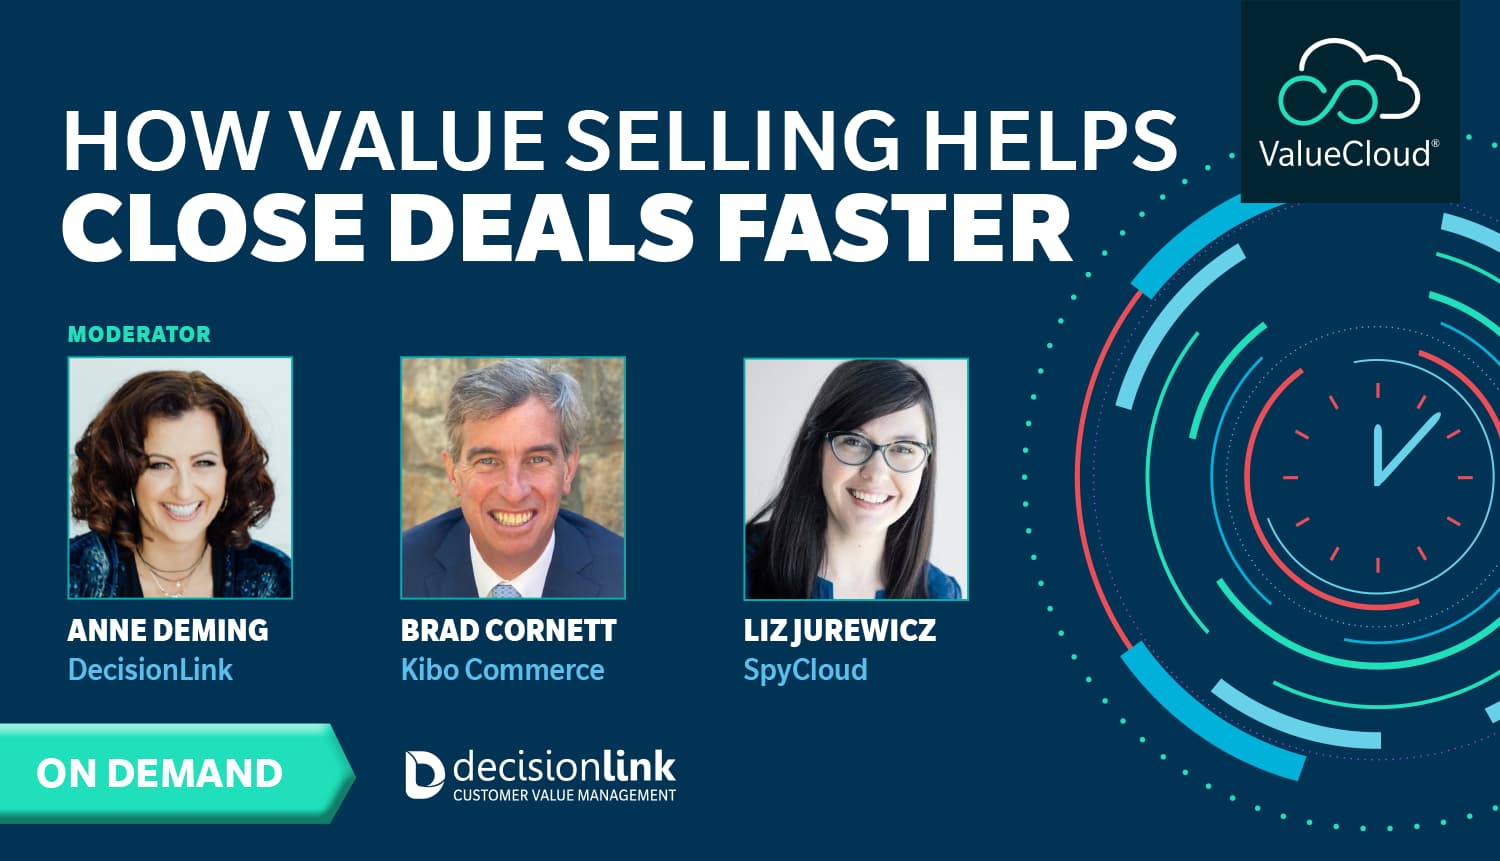 How Value Selling Helps Close Deals Faster